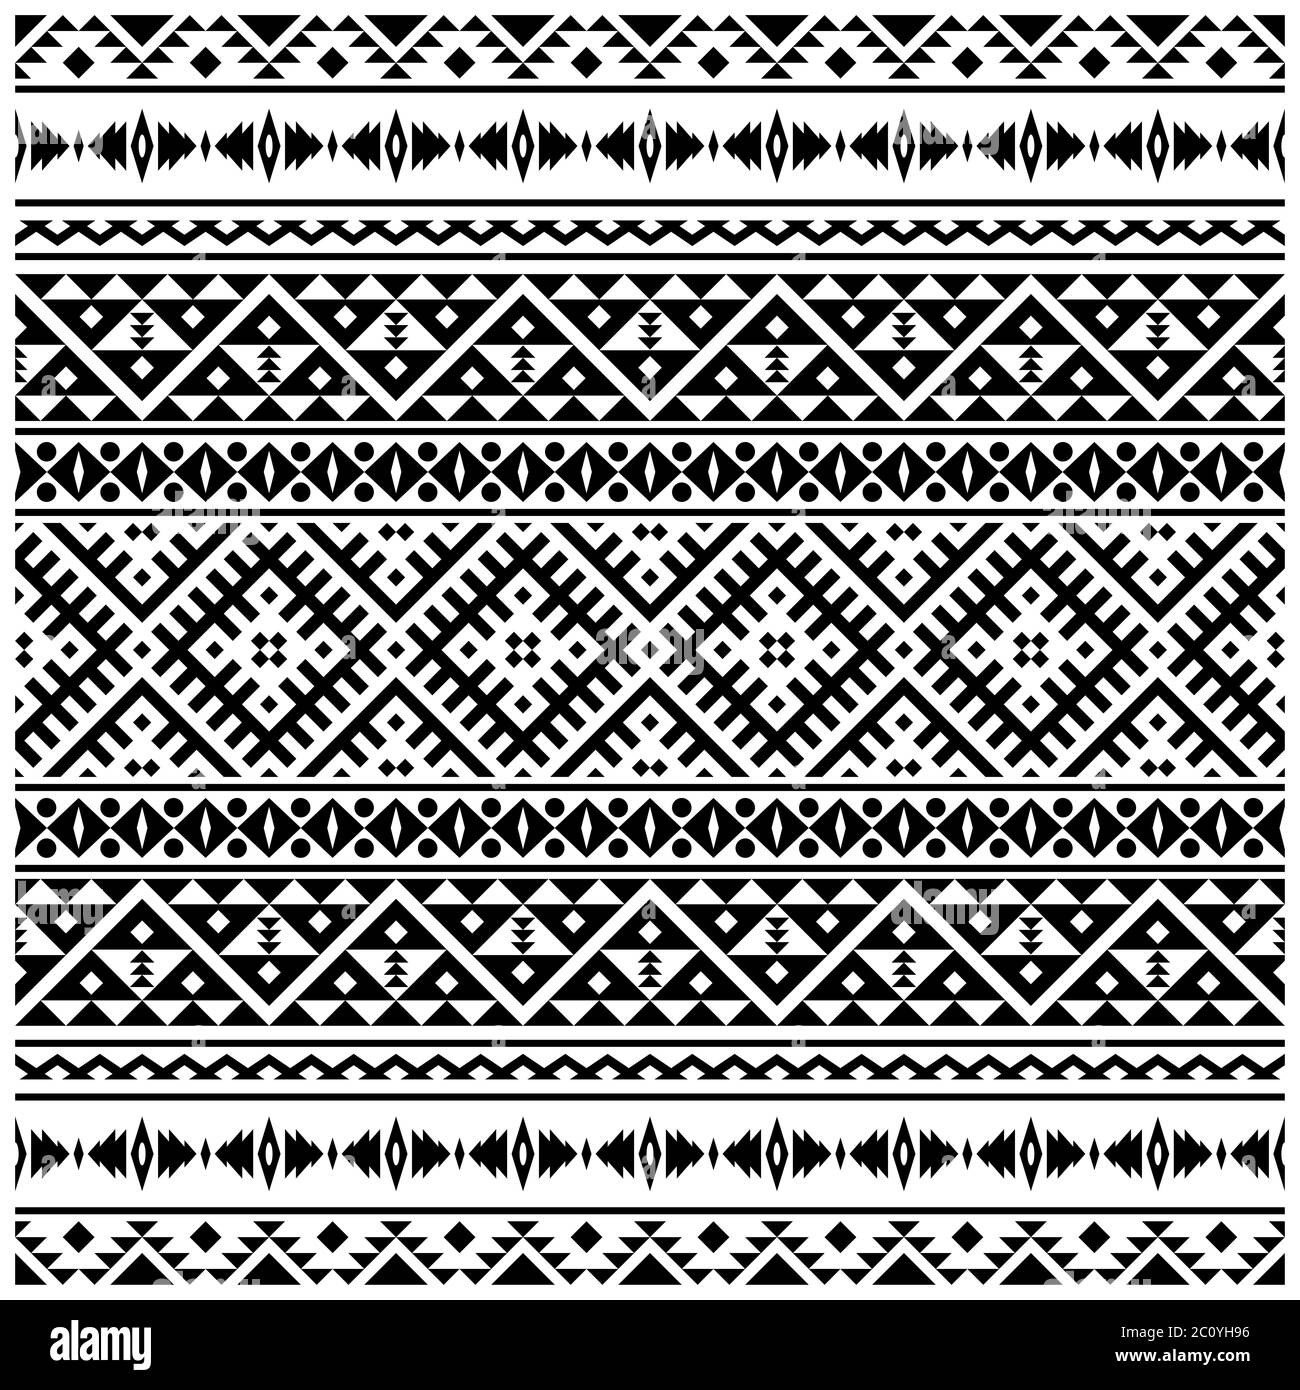 Aztec seamless pattern ethnic background design vector. Illustration of Traditional motifs Stock Photo